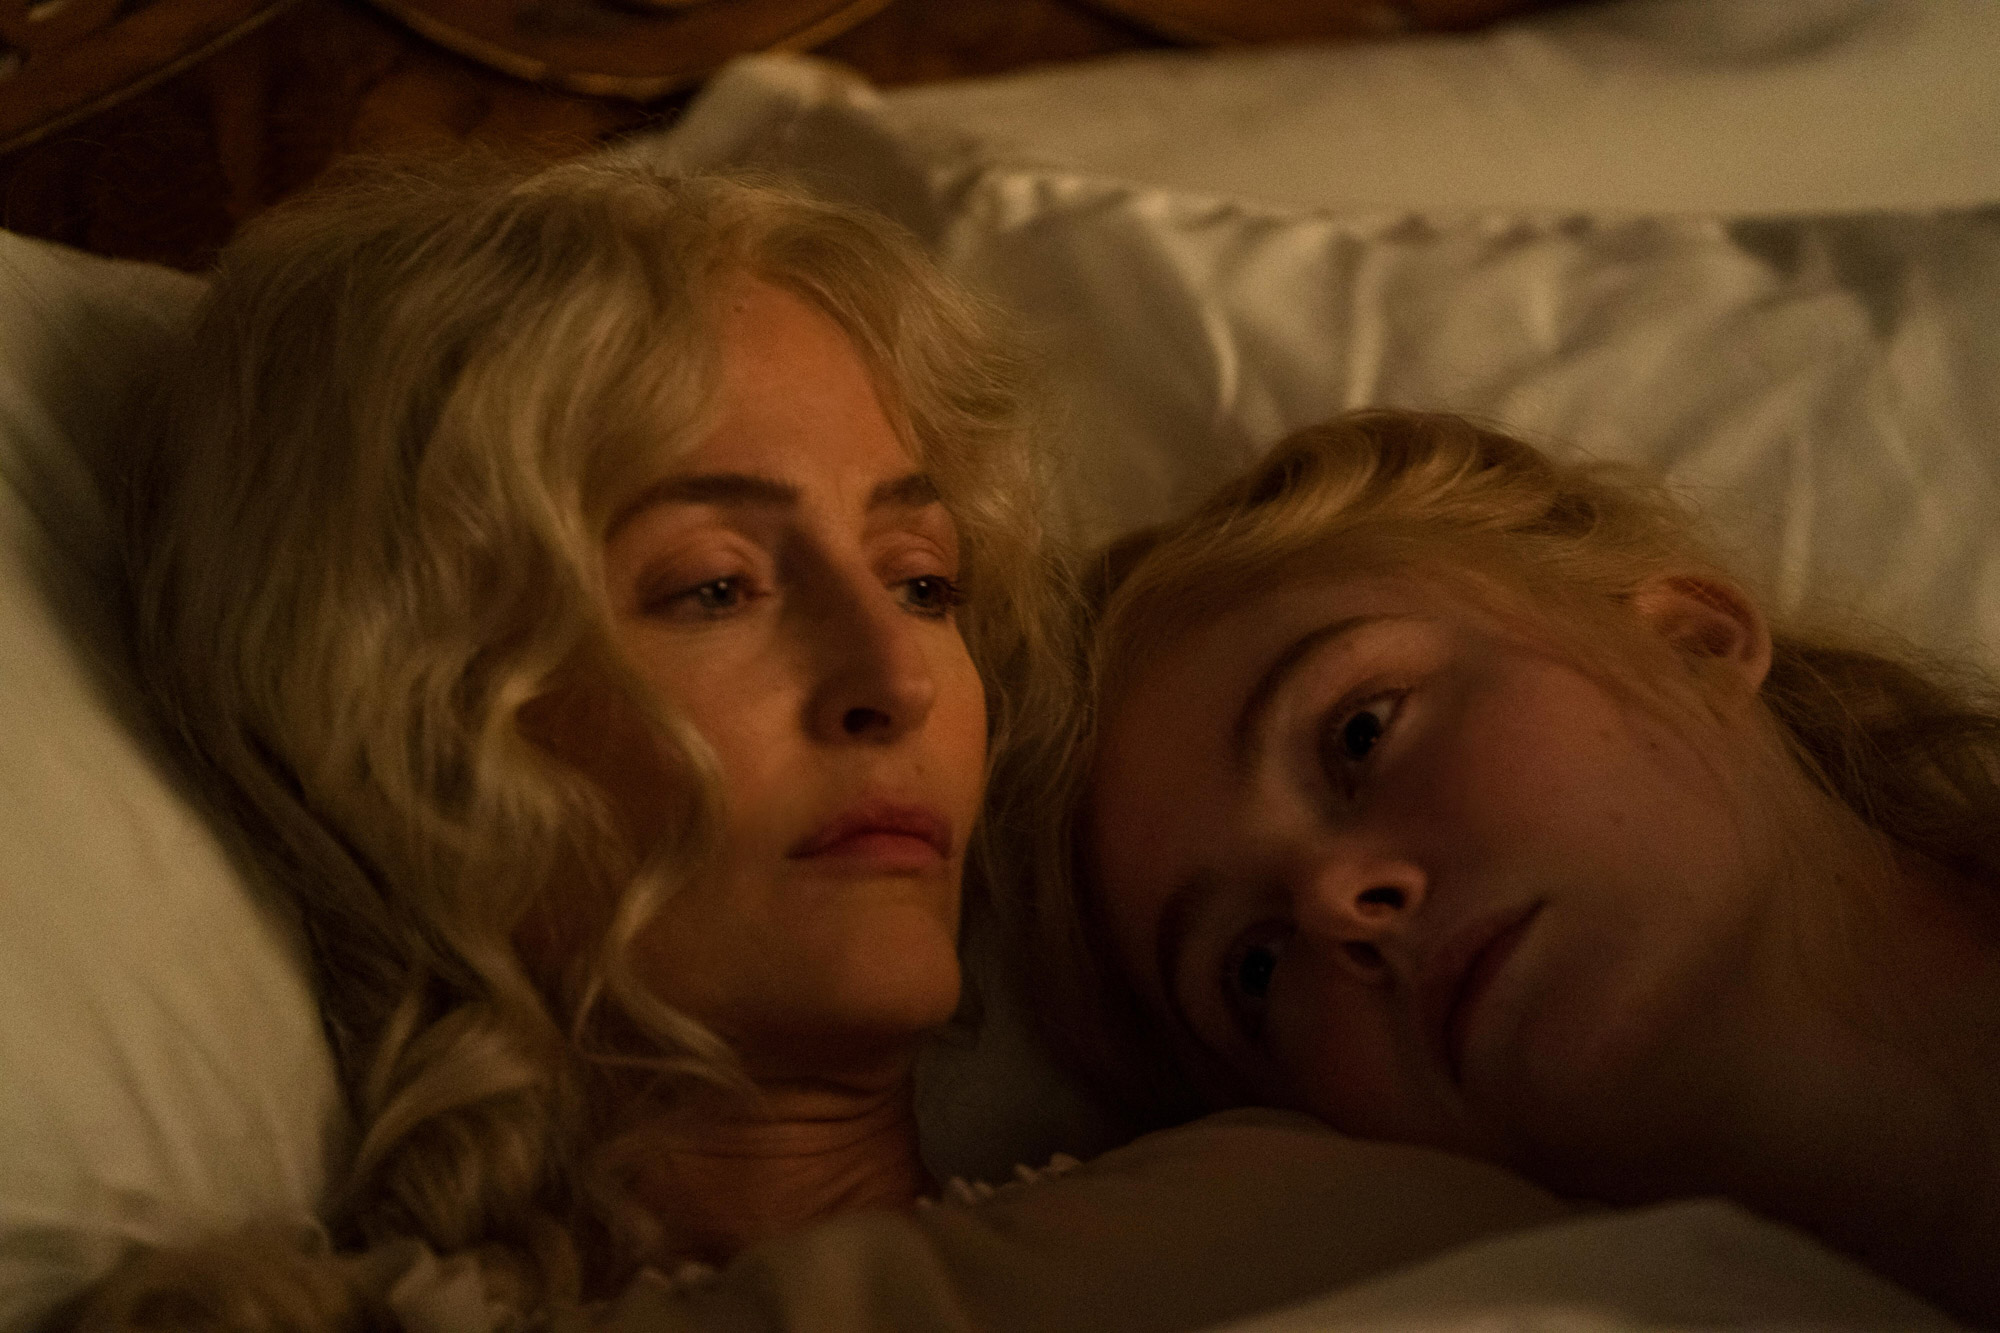 Elle Fanning and Gillian Anderson in The Great. Photo by Gareth Gatrell. © Hulu